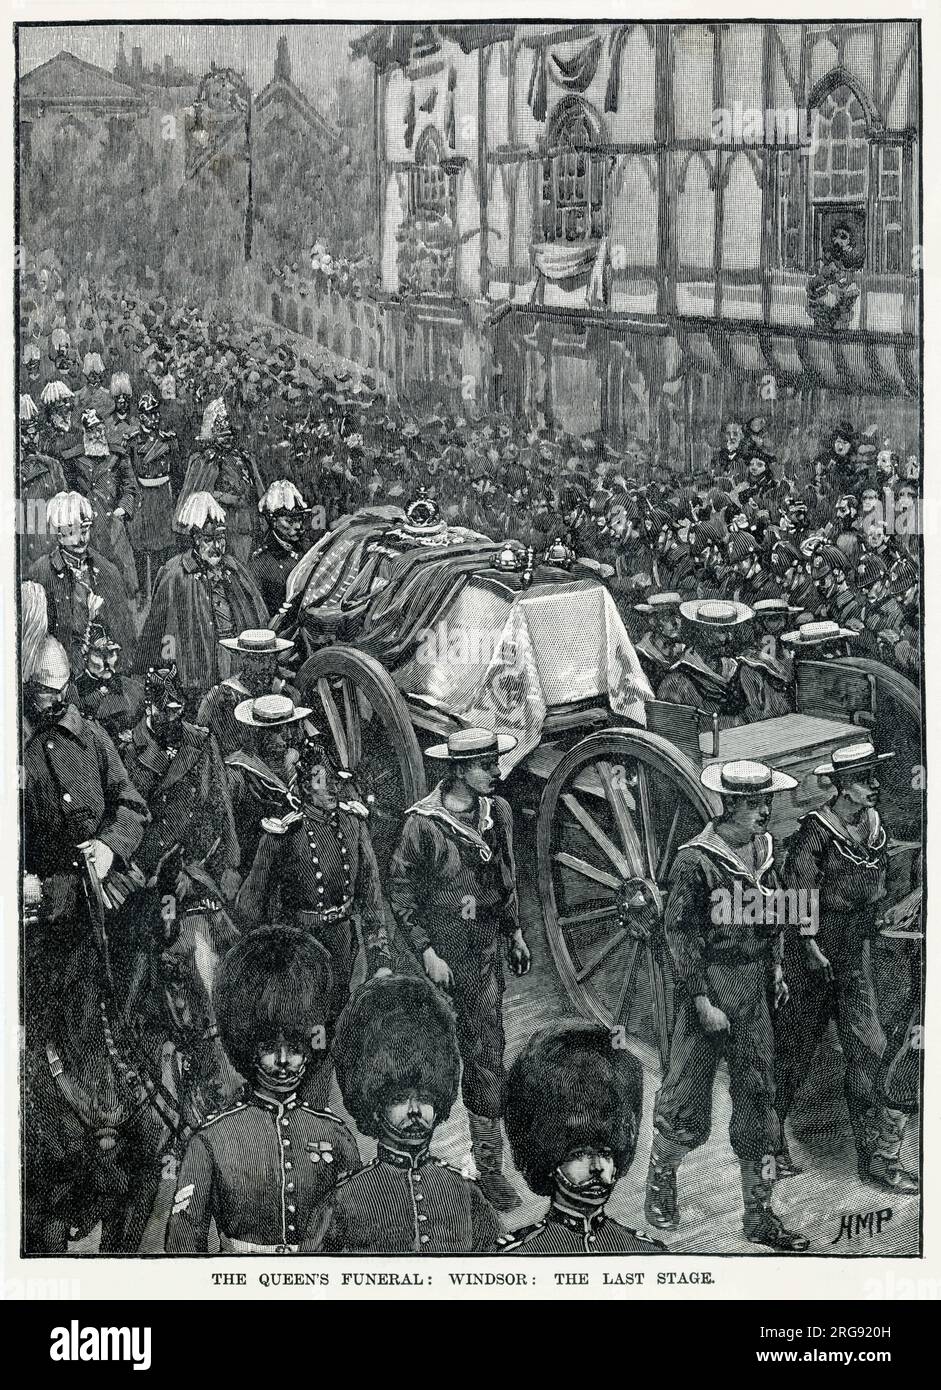 Arriving at Windsor for Queen Victoria's last journey before being interred beside Prince Albert. The coffin was placed on the gun carriage to be pulled by the white horses, but however, the horses began to act up and were so unruly that they broke harness. The funeral mourners where unaware of the problem and had to come back. Quickly alternative arrangements had to be made, a naval guard of honor found a communications cord and turned into impromptu harness and the Blue Jackets Sailors themselves then pulled the queen's funeral carriage. Stock Photo